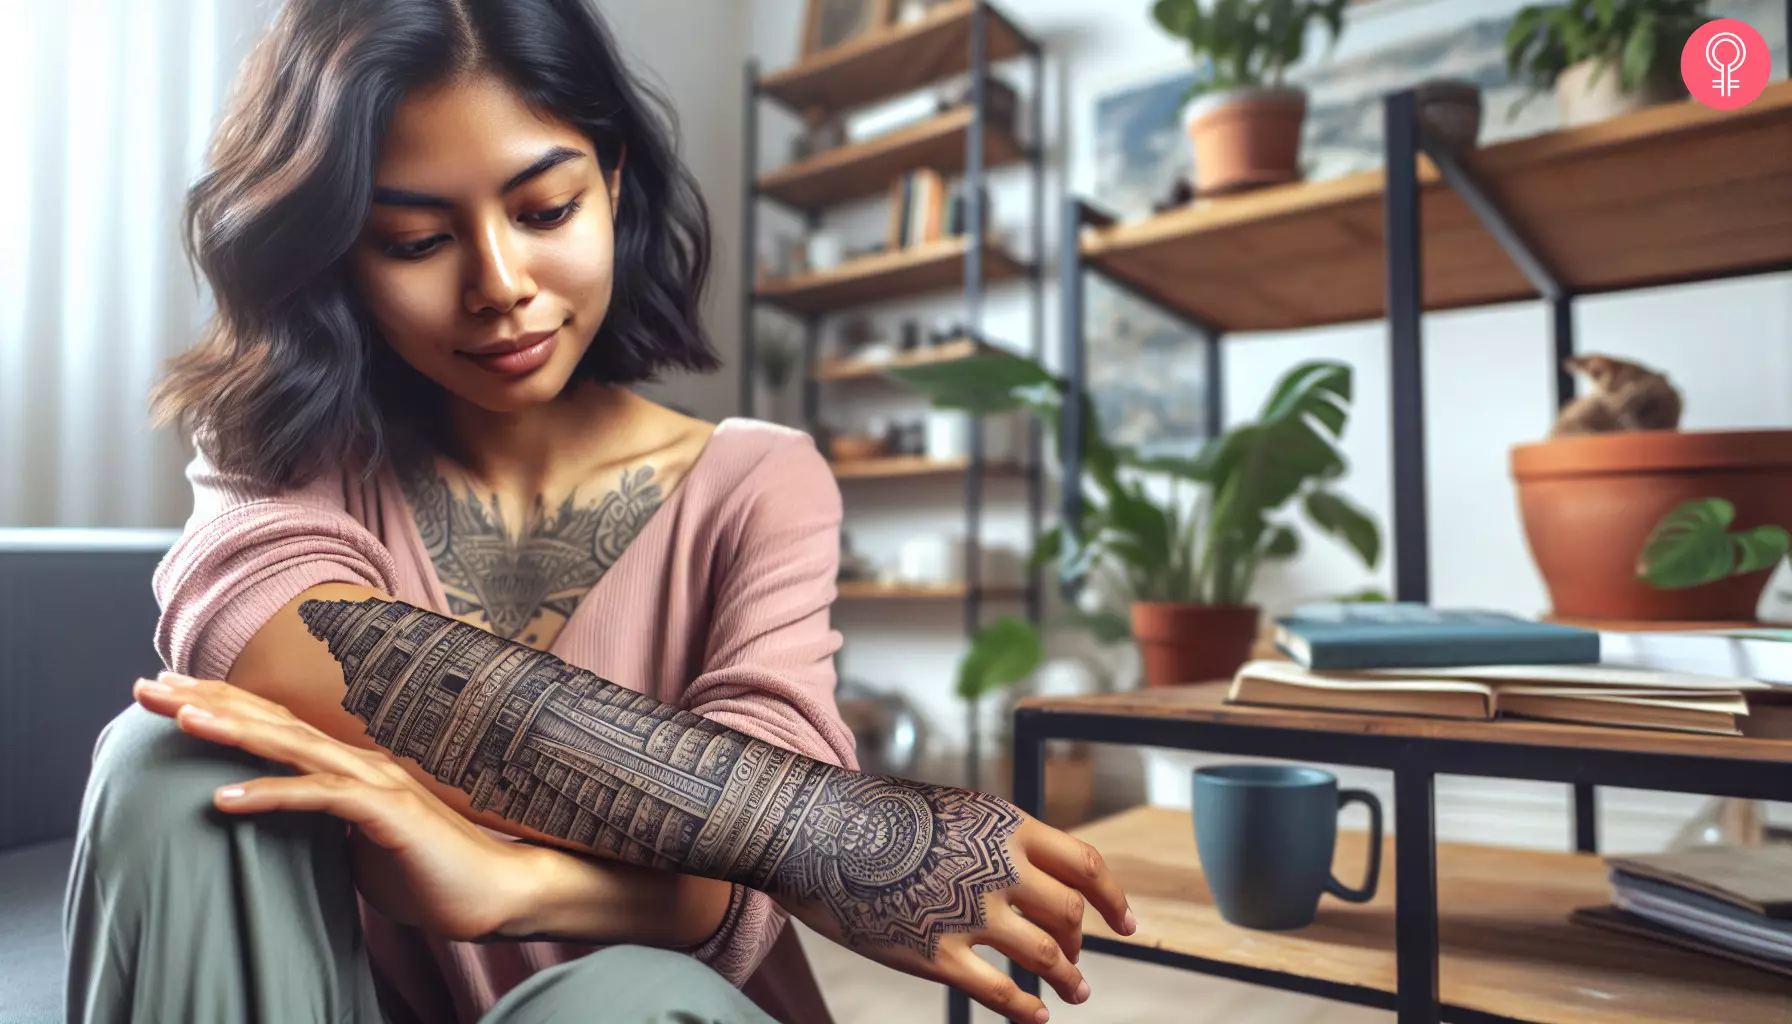 A Mayan temple tattoo on a woman’s arm